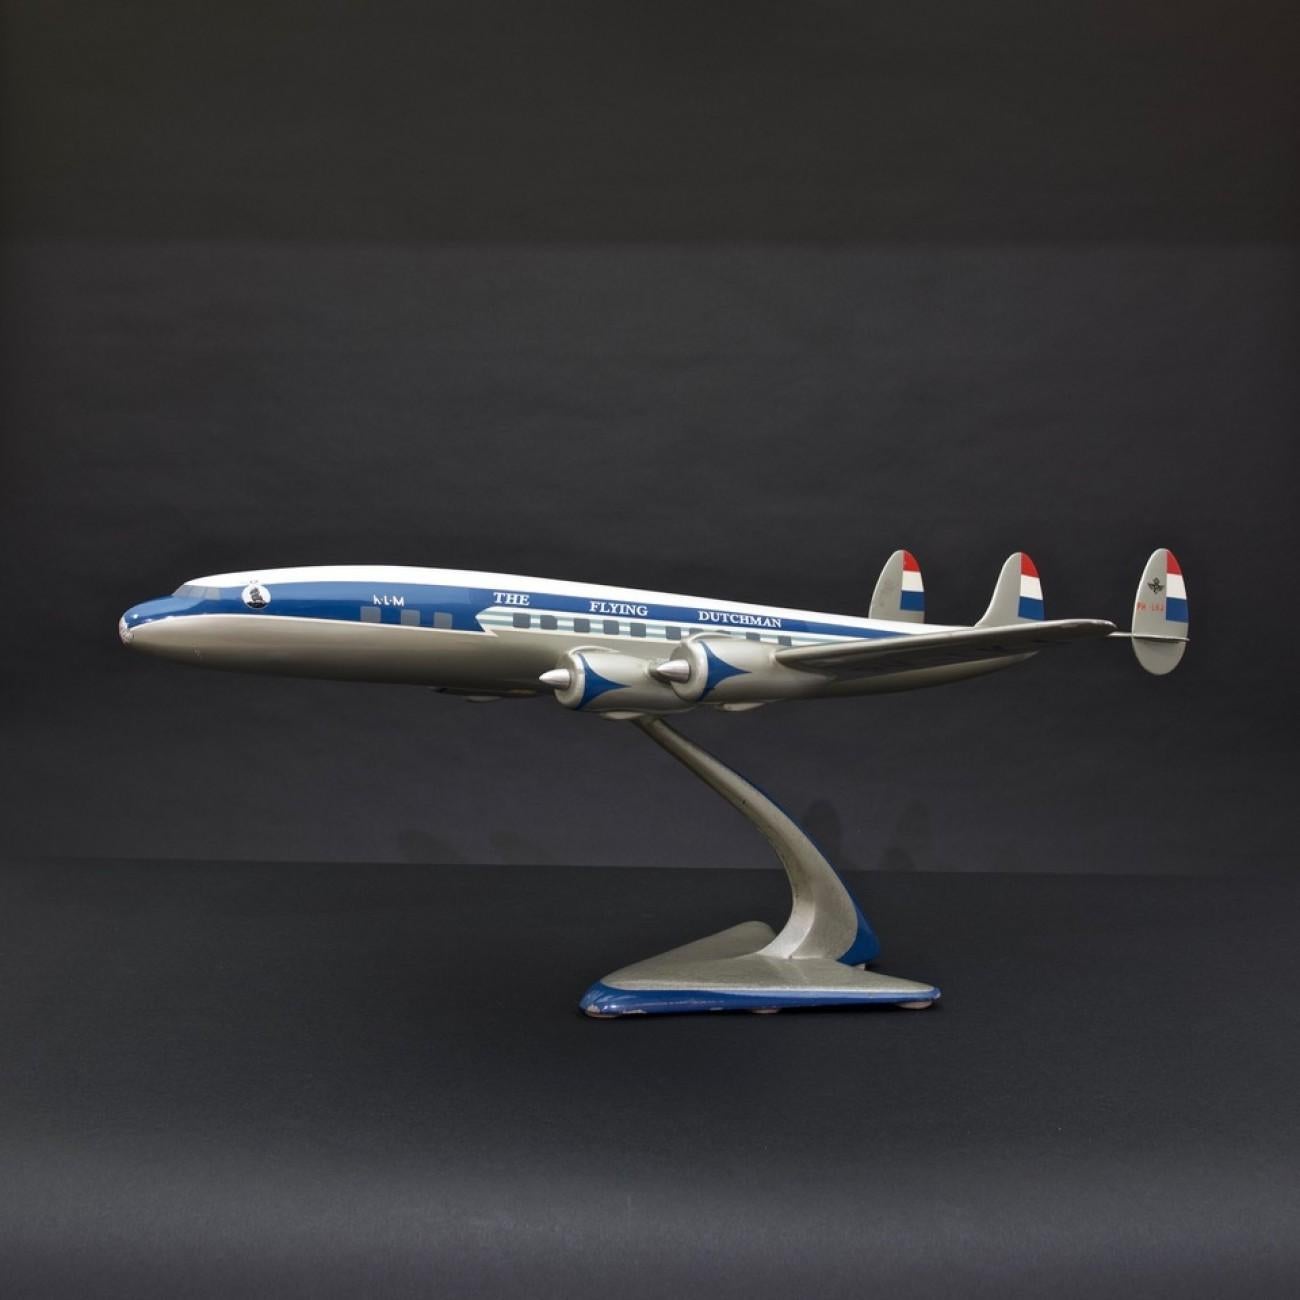 A fantastic cast aluminium model of a Super Constellation airplane on original stand in period KLM livery, circa 1953. By Walkers Westway Models who were active from 1942 - 1957 as bespoke model aircraft makers to the aircraft/airline industries,